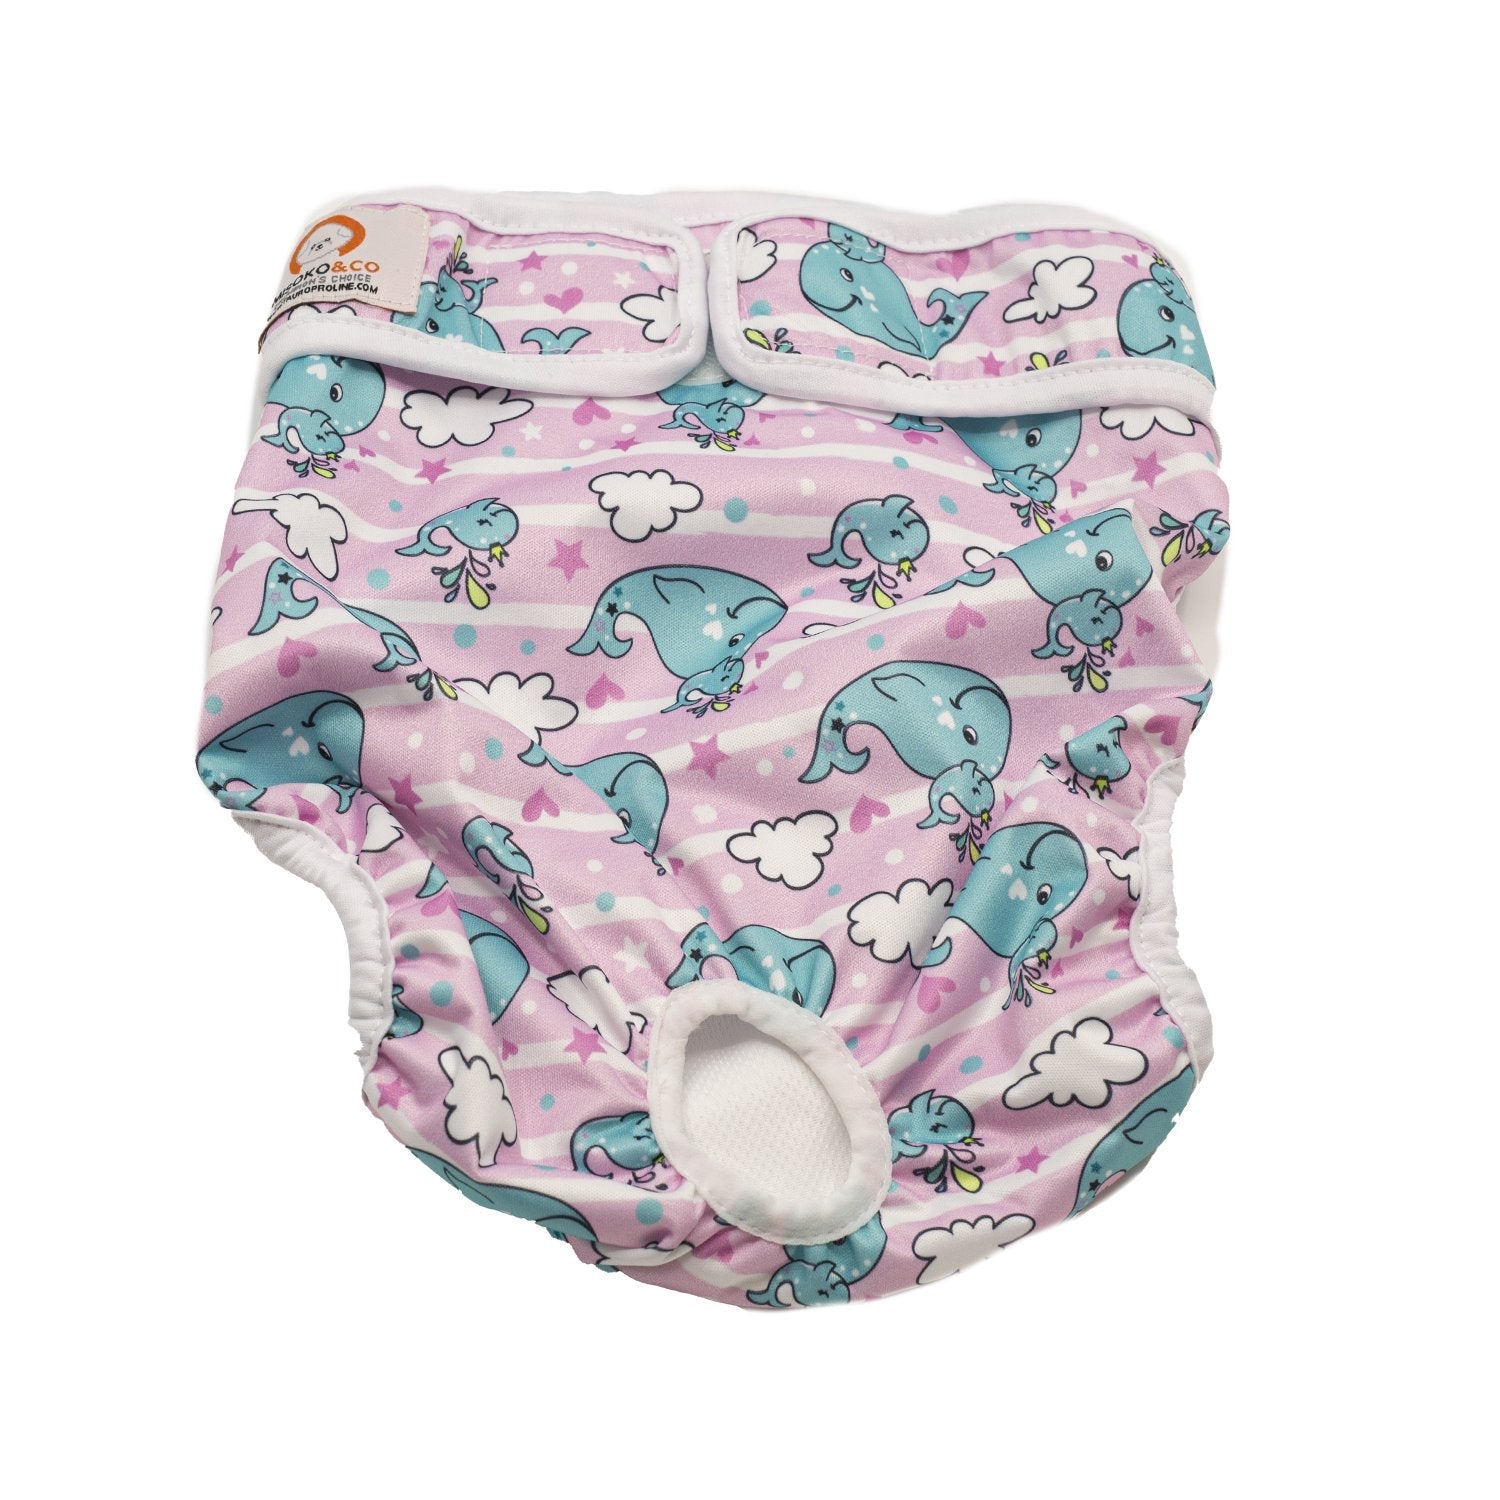 Misoko&Co Washable, Size Adjustable, Puppy Training, High Absorbency D